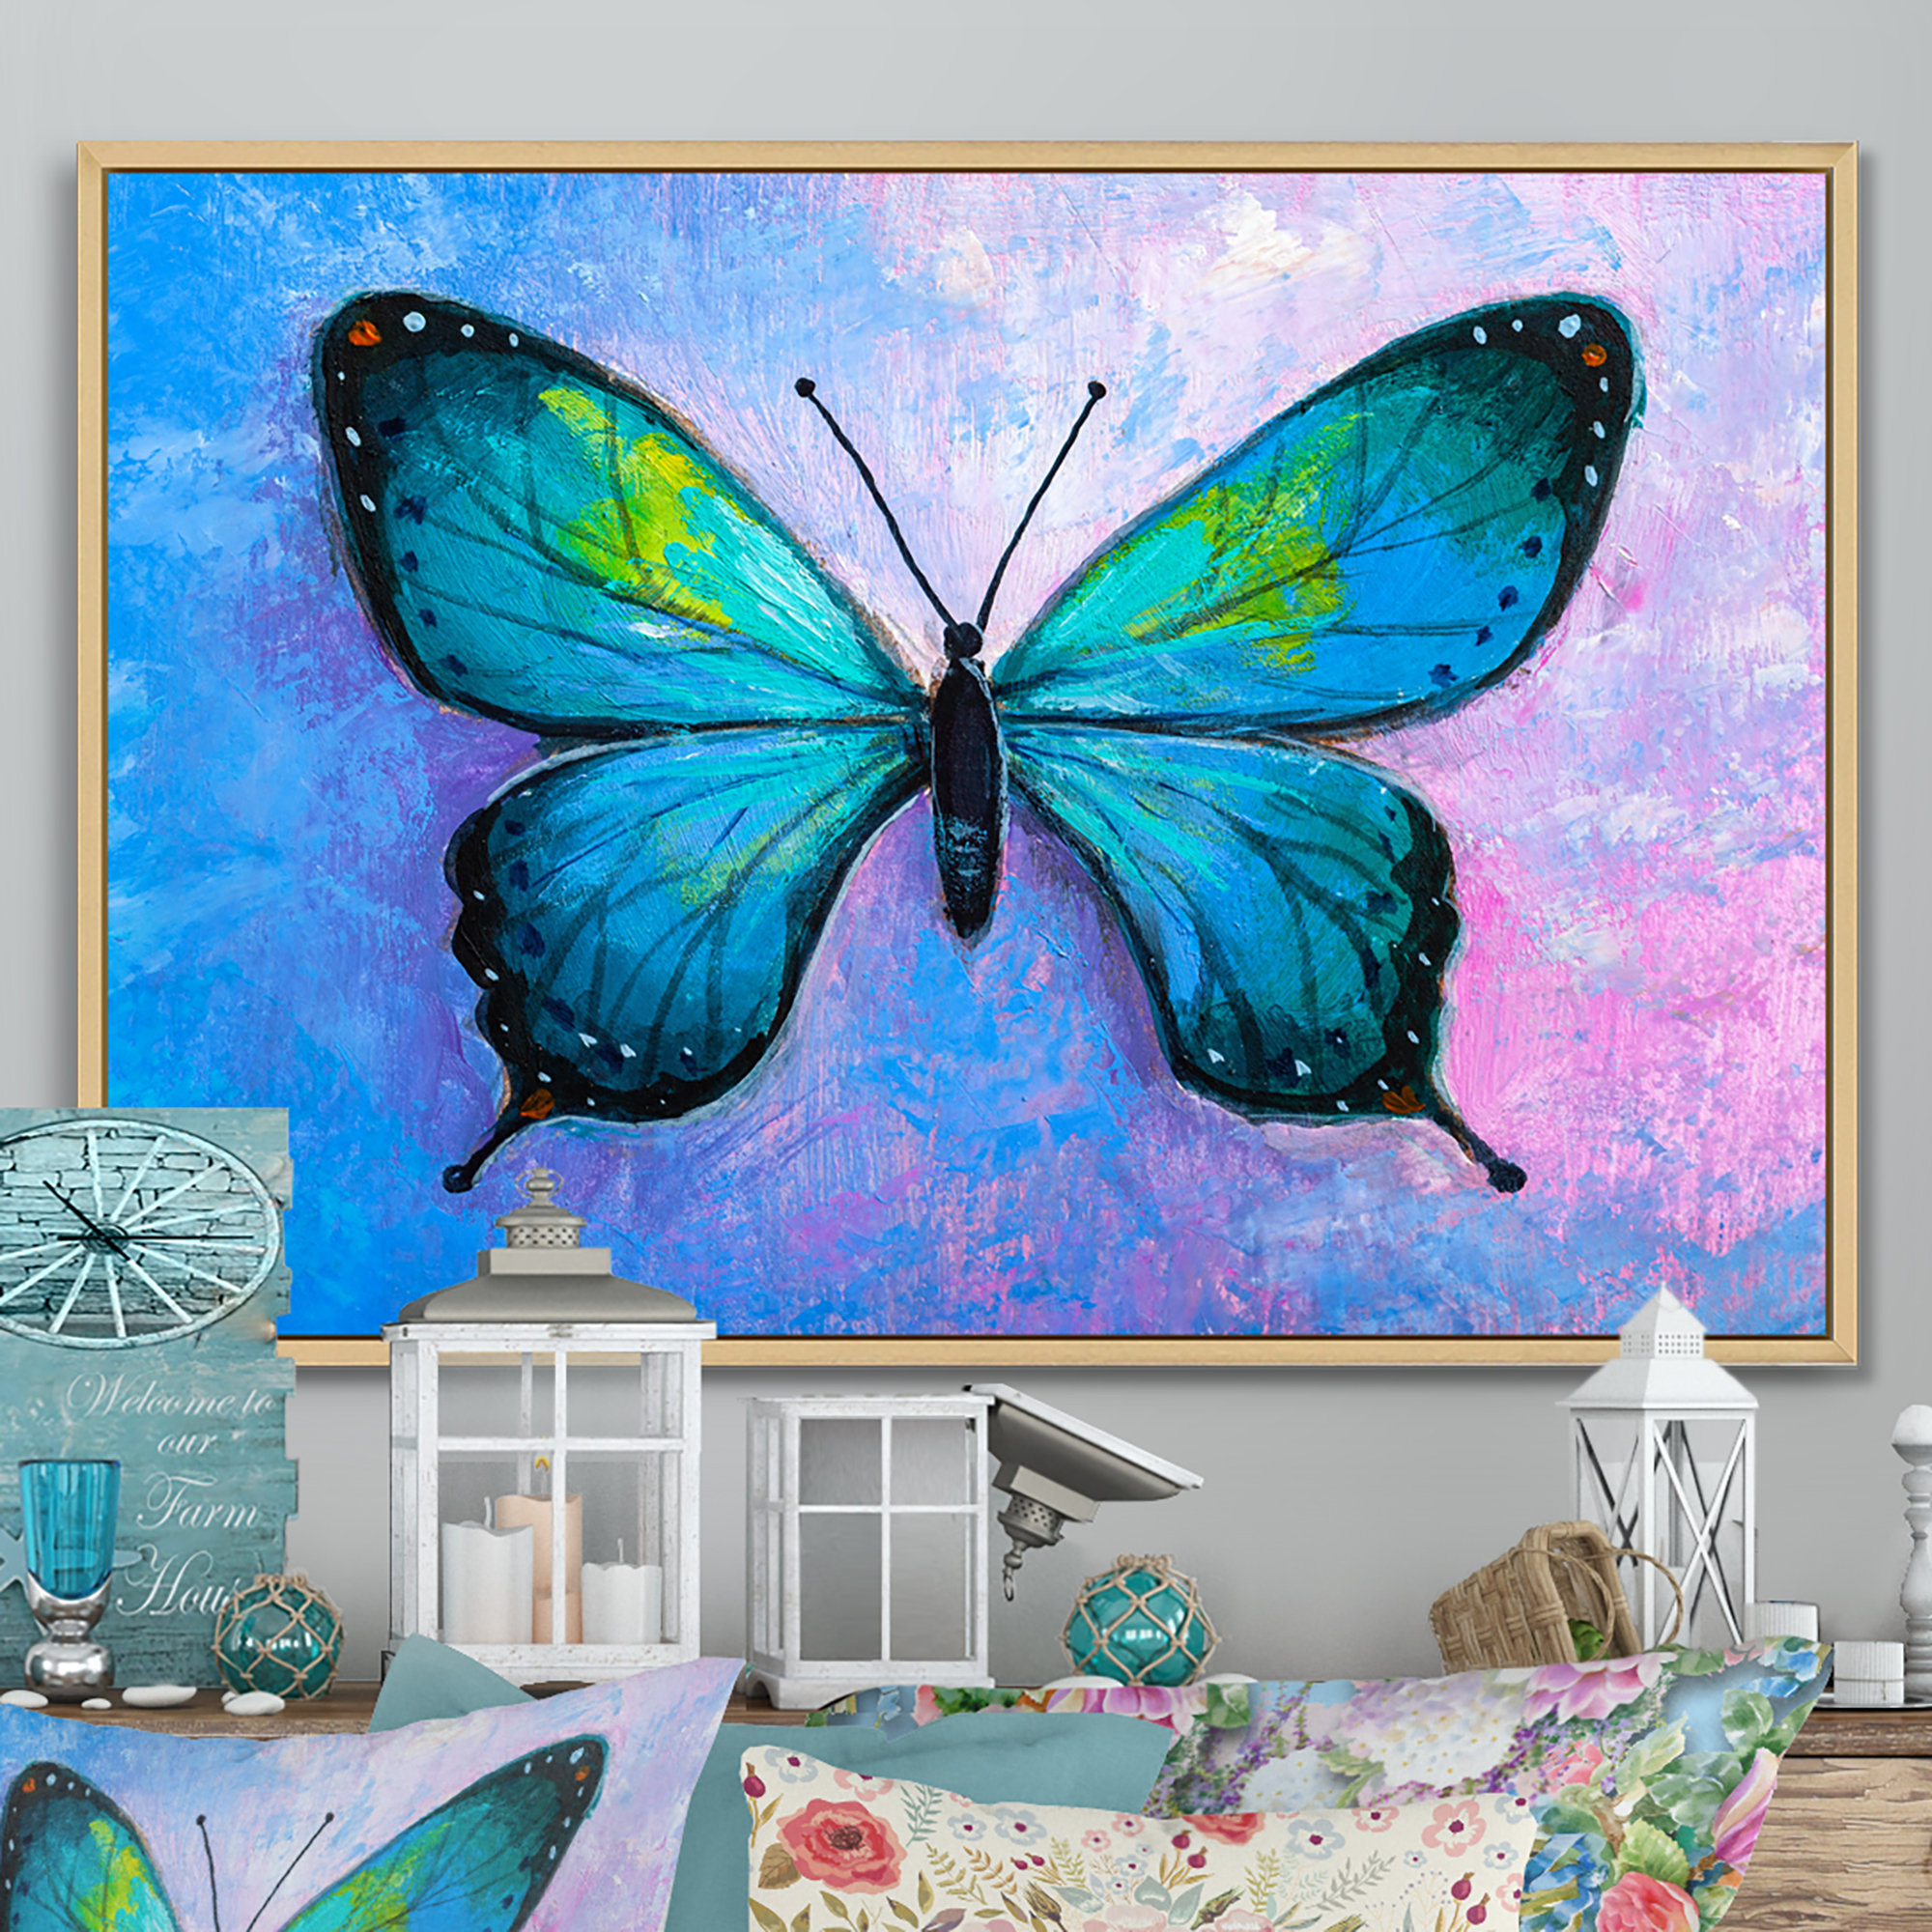 Contemporary Art Abstract Butterfly in Teal 14 x 14 on Cotton Ragg -  Acrylic on Cotton Ragg Paper, in Floral and Flower Paintings